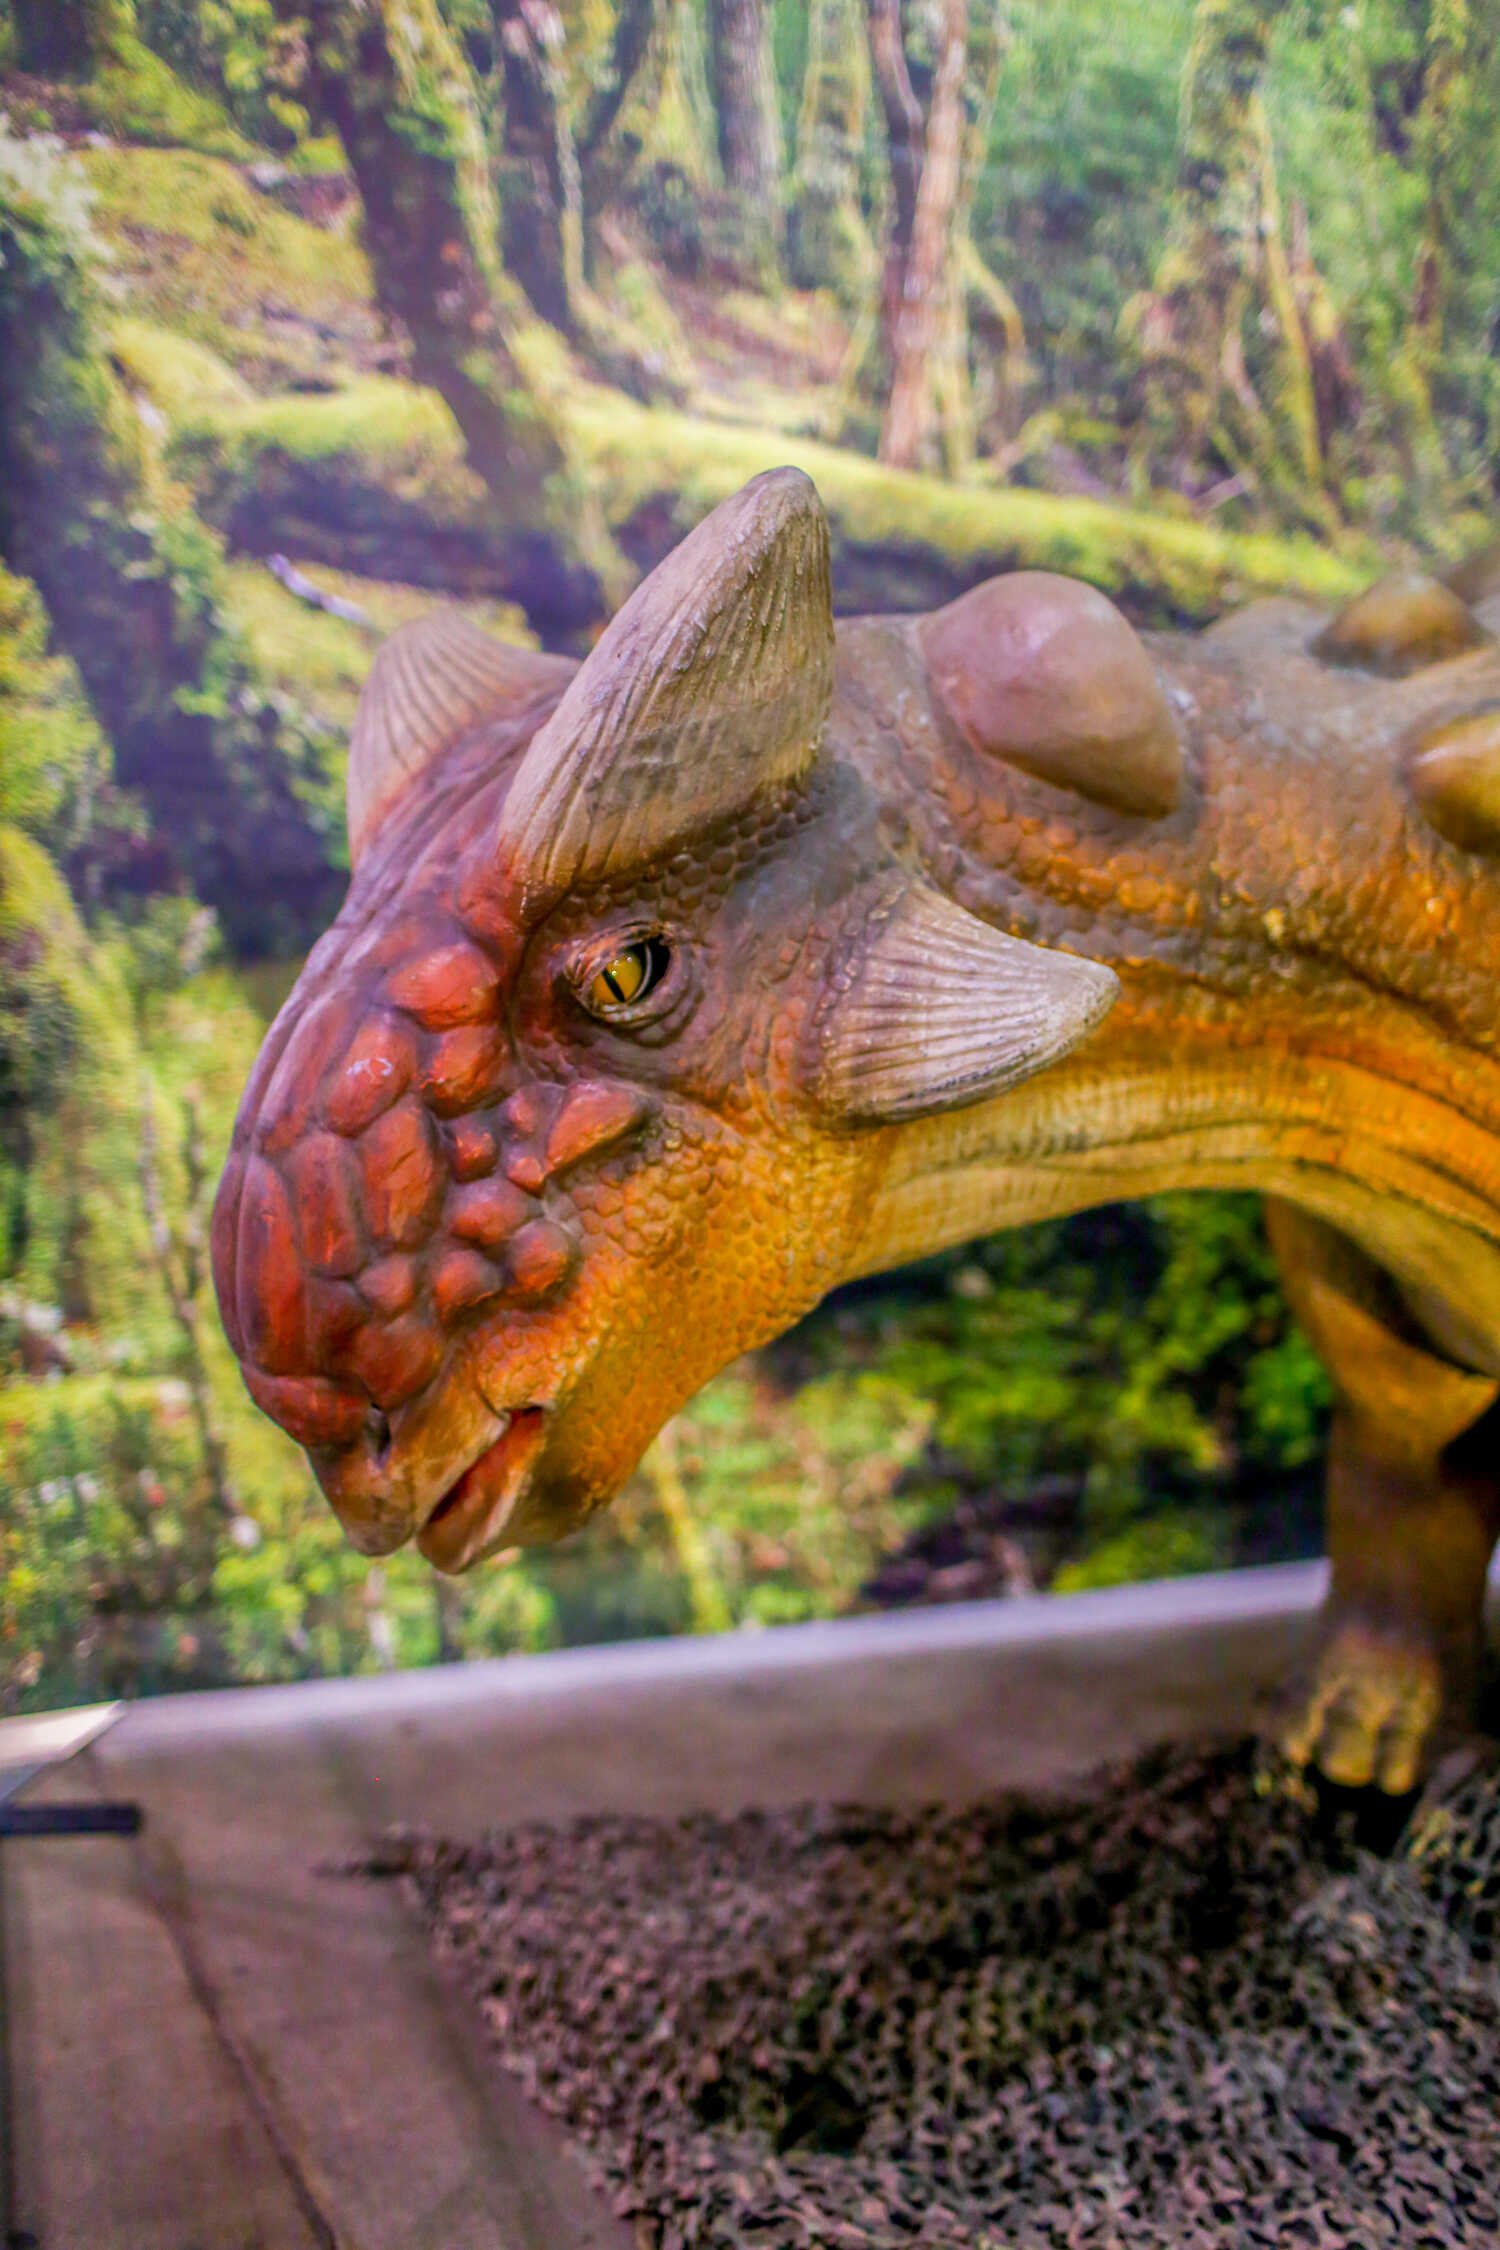 An Honest Review of Jurassic Quest - Is it Worth the Price of Admission